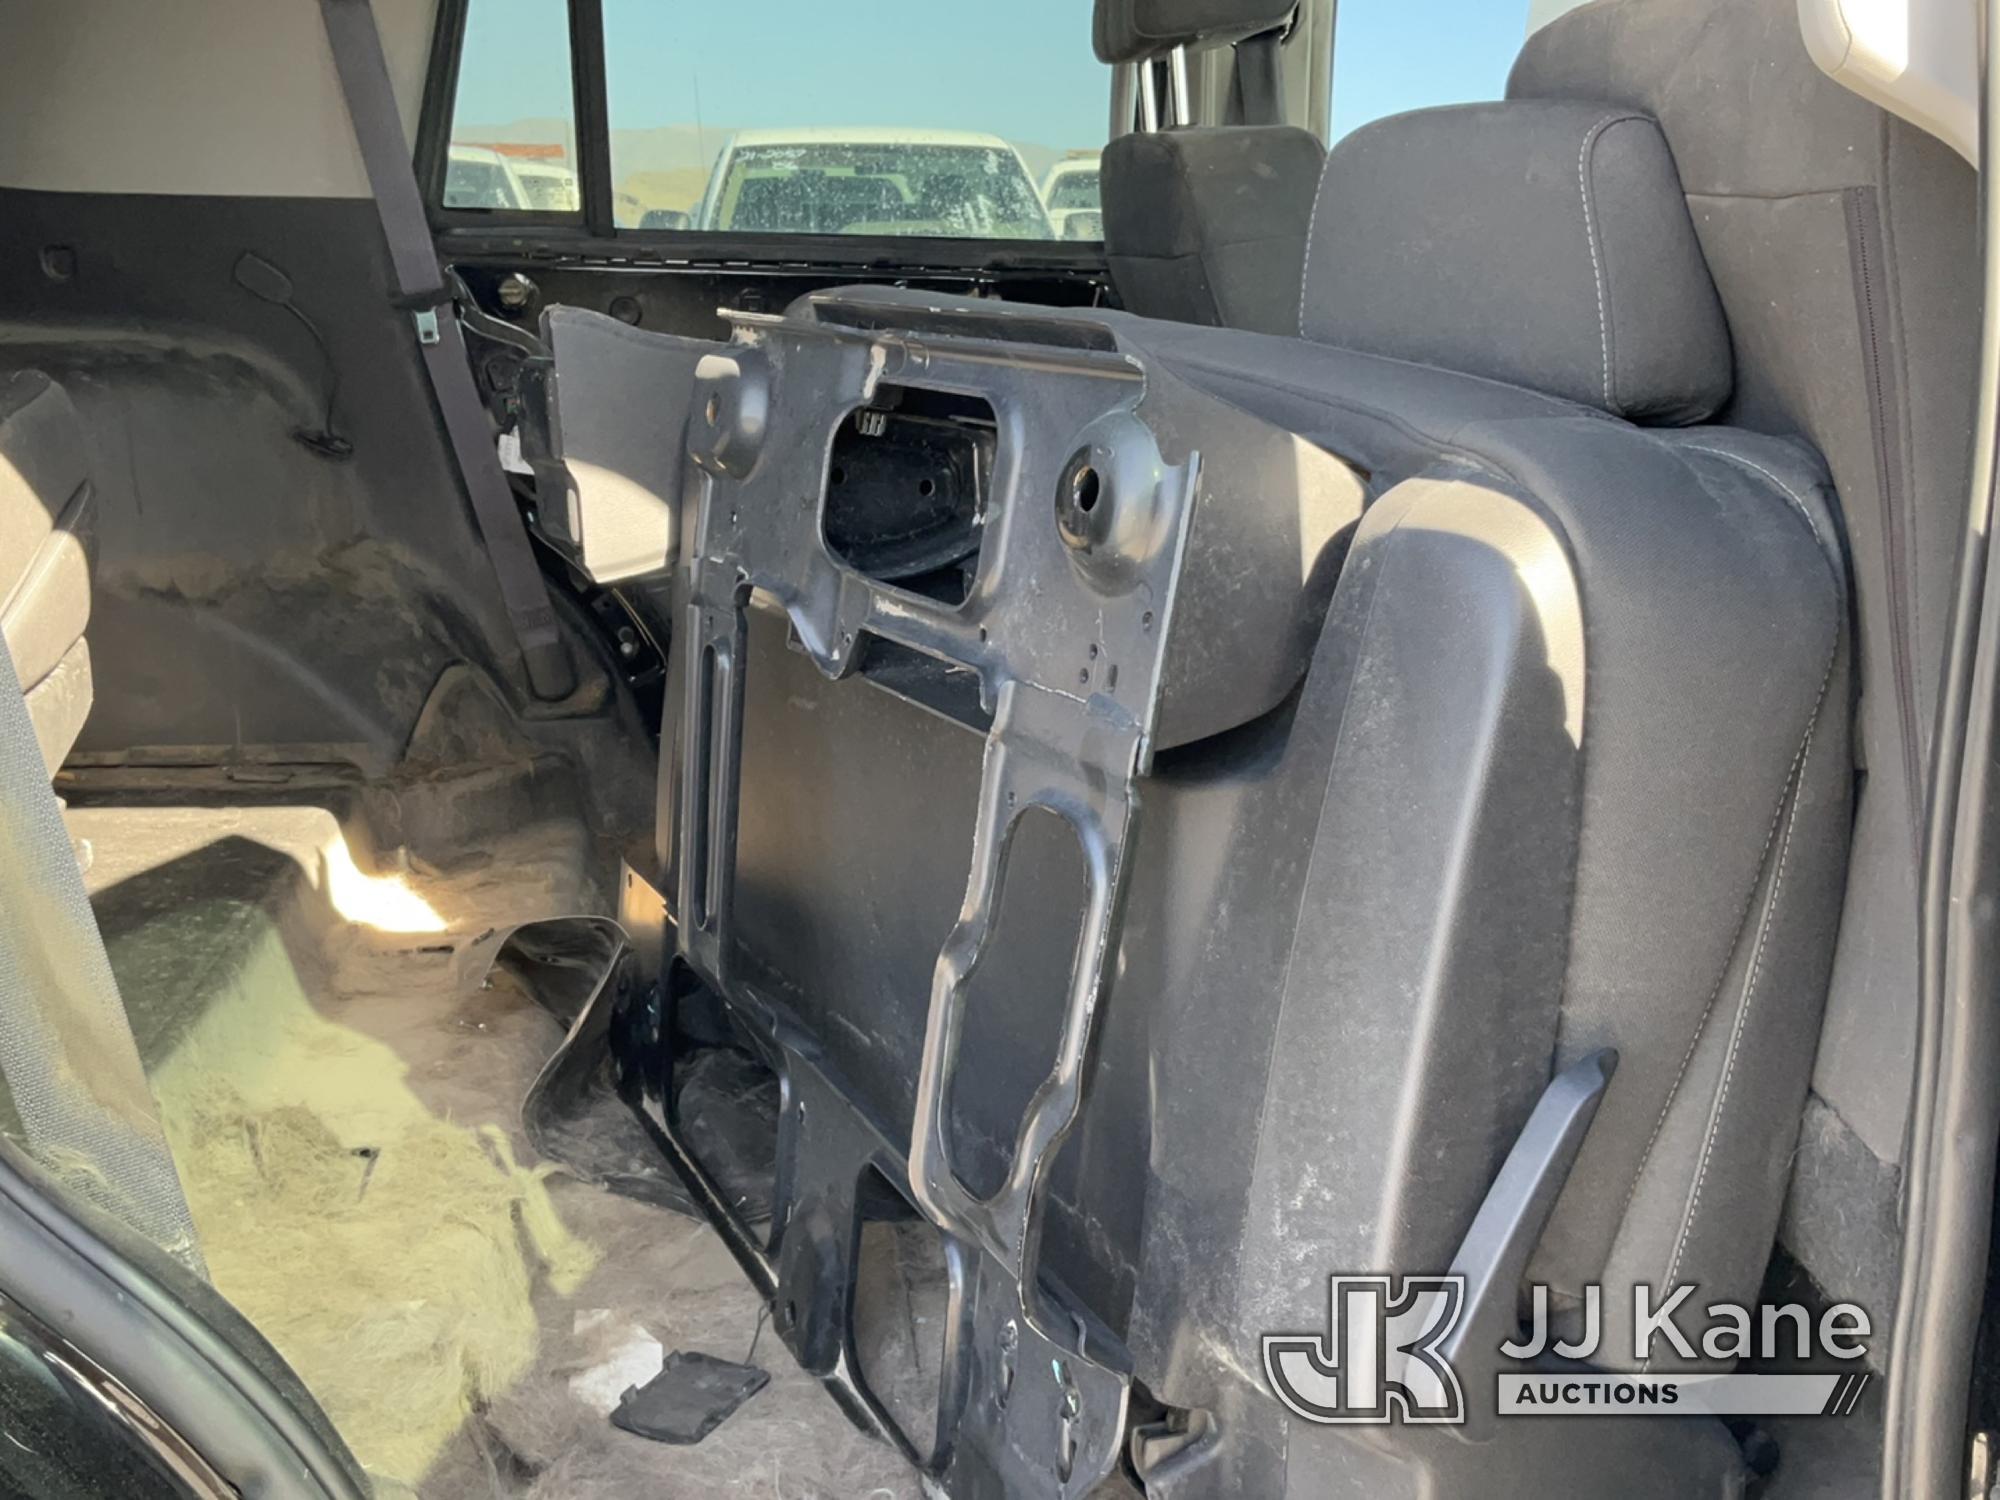 (Las Vegas, NV) 2016 Chevrolet Tahoe Police Package Towed In, No Console, Rear Seats Unsecured Check